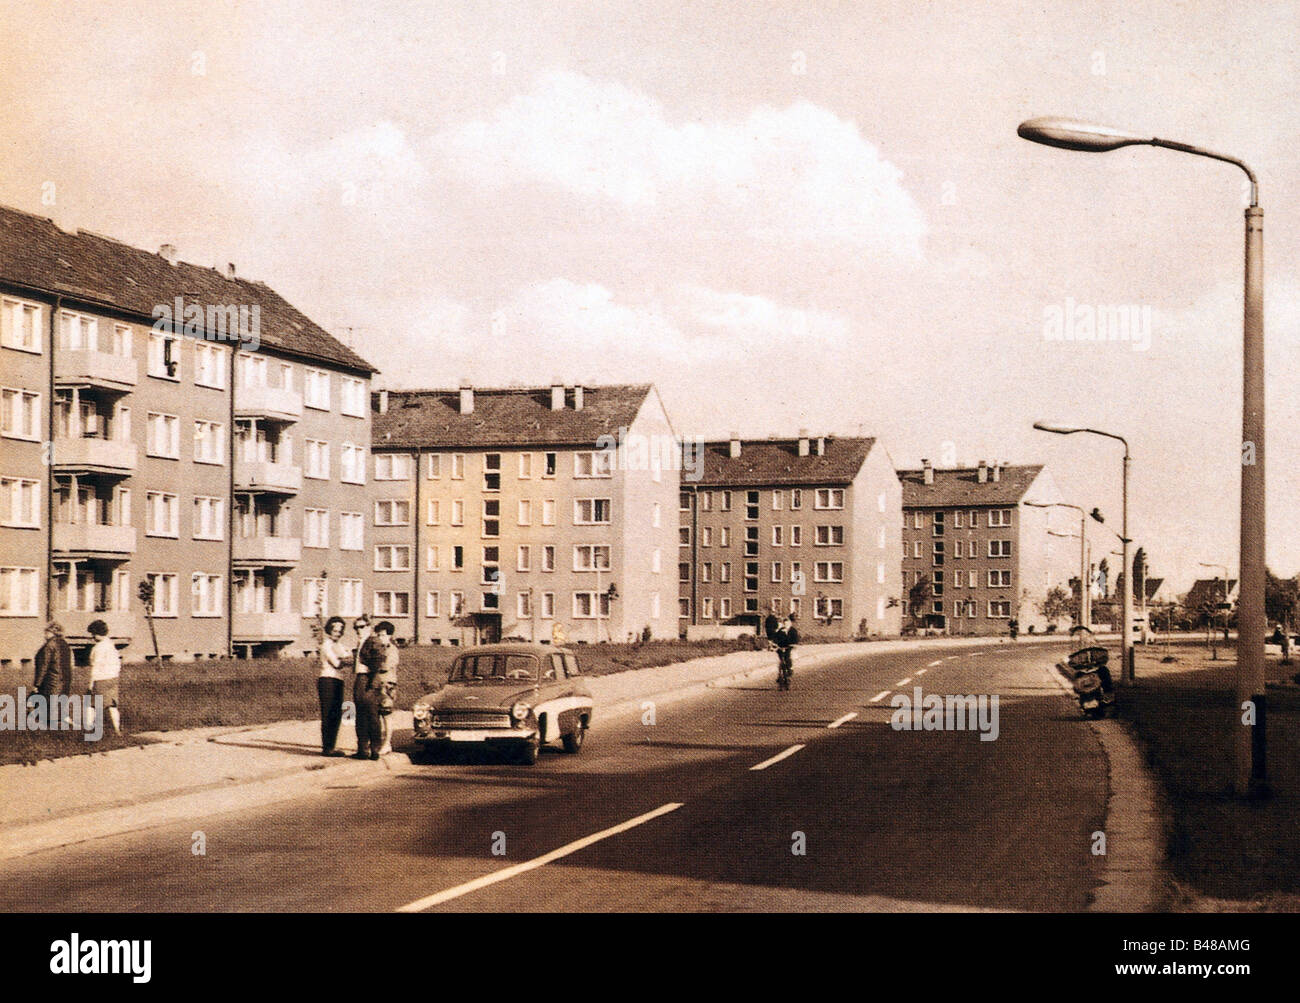 geography / travel, Germany, GDR, Eilenburg - East, street scenes, Rosa-Luxemburg-Straße, 1970s, 70s, historic, historical, passenger car, automobile, Eastern bloc, settlement, province, provincial town, Rosa-Luxemburg-Strasse, East Germany, DDR, German Democratic Republic, 20th century, people, Stock Photo